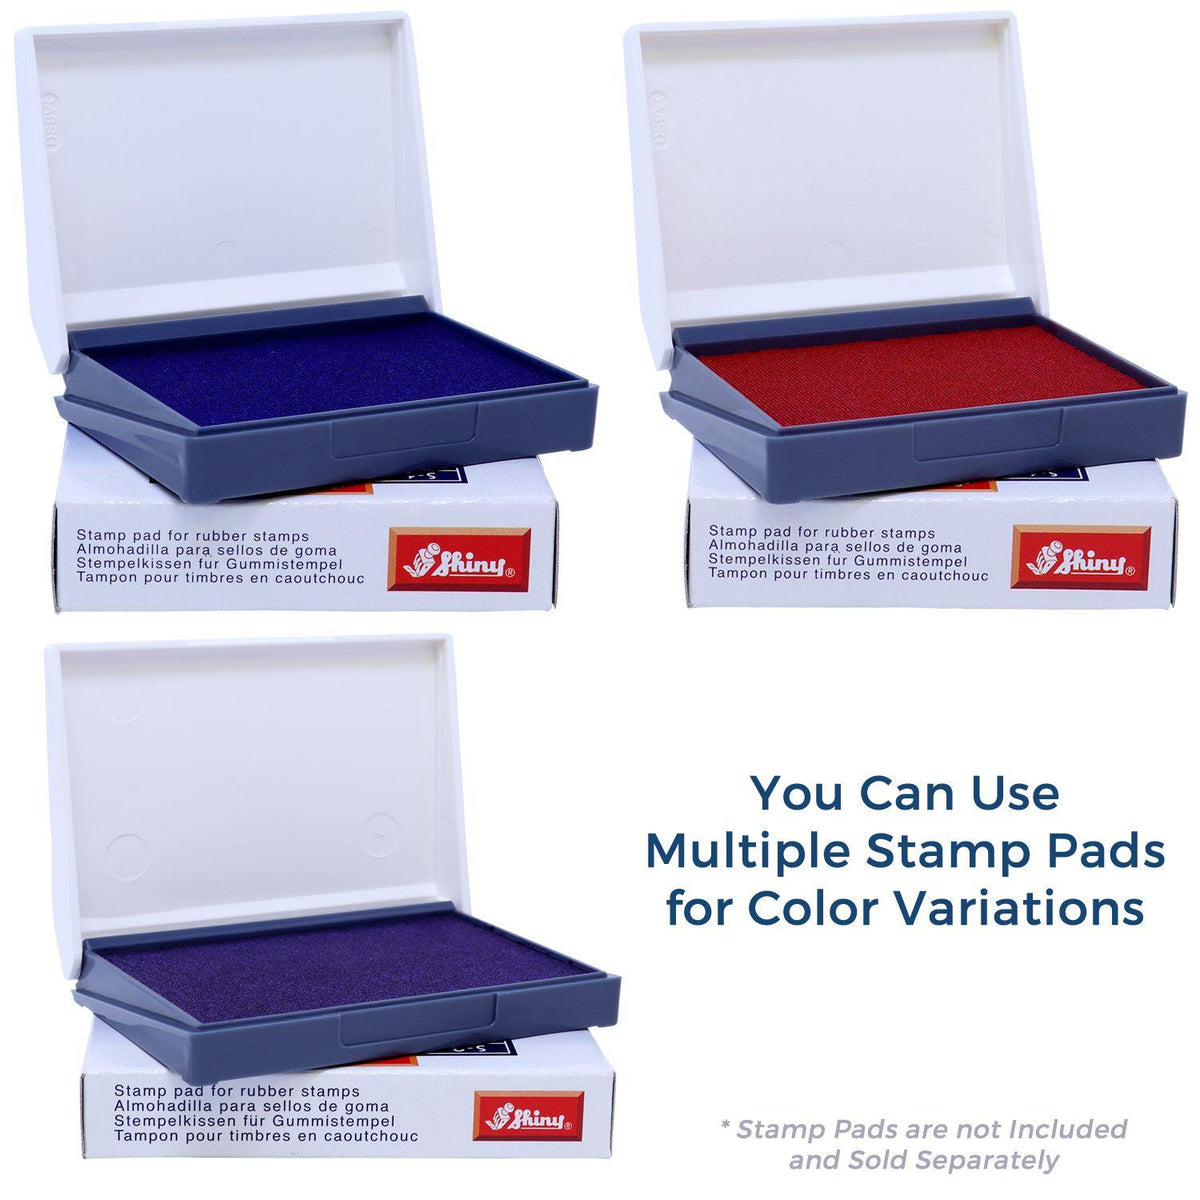 Stamp Pads for Large Hot Document Rubber Stamp Available